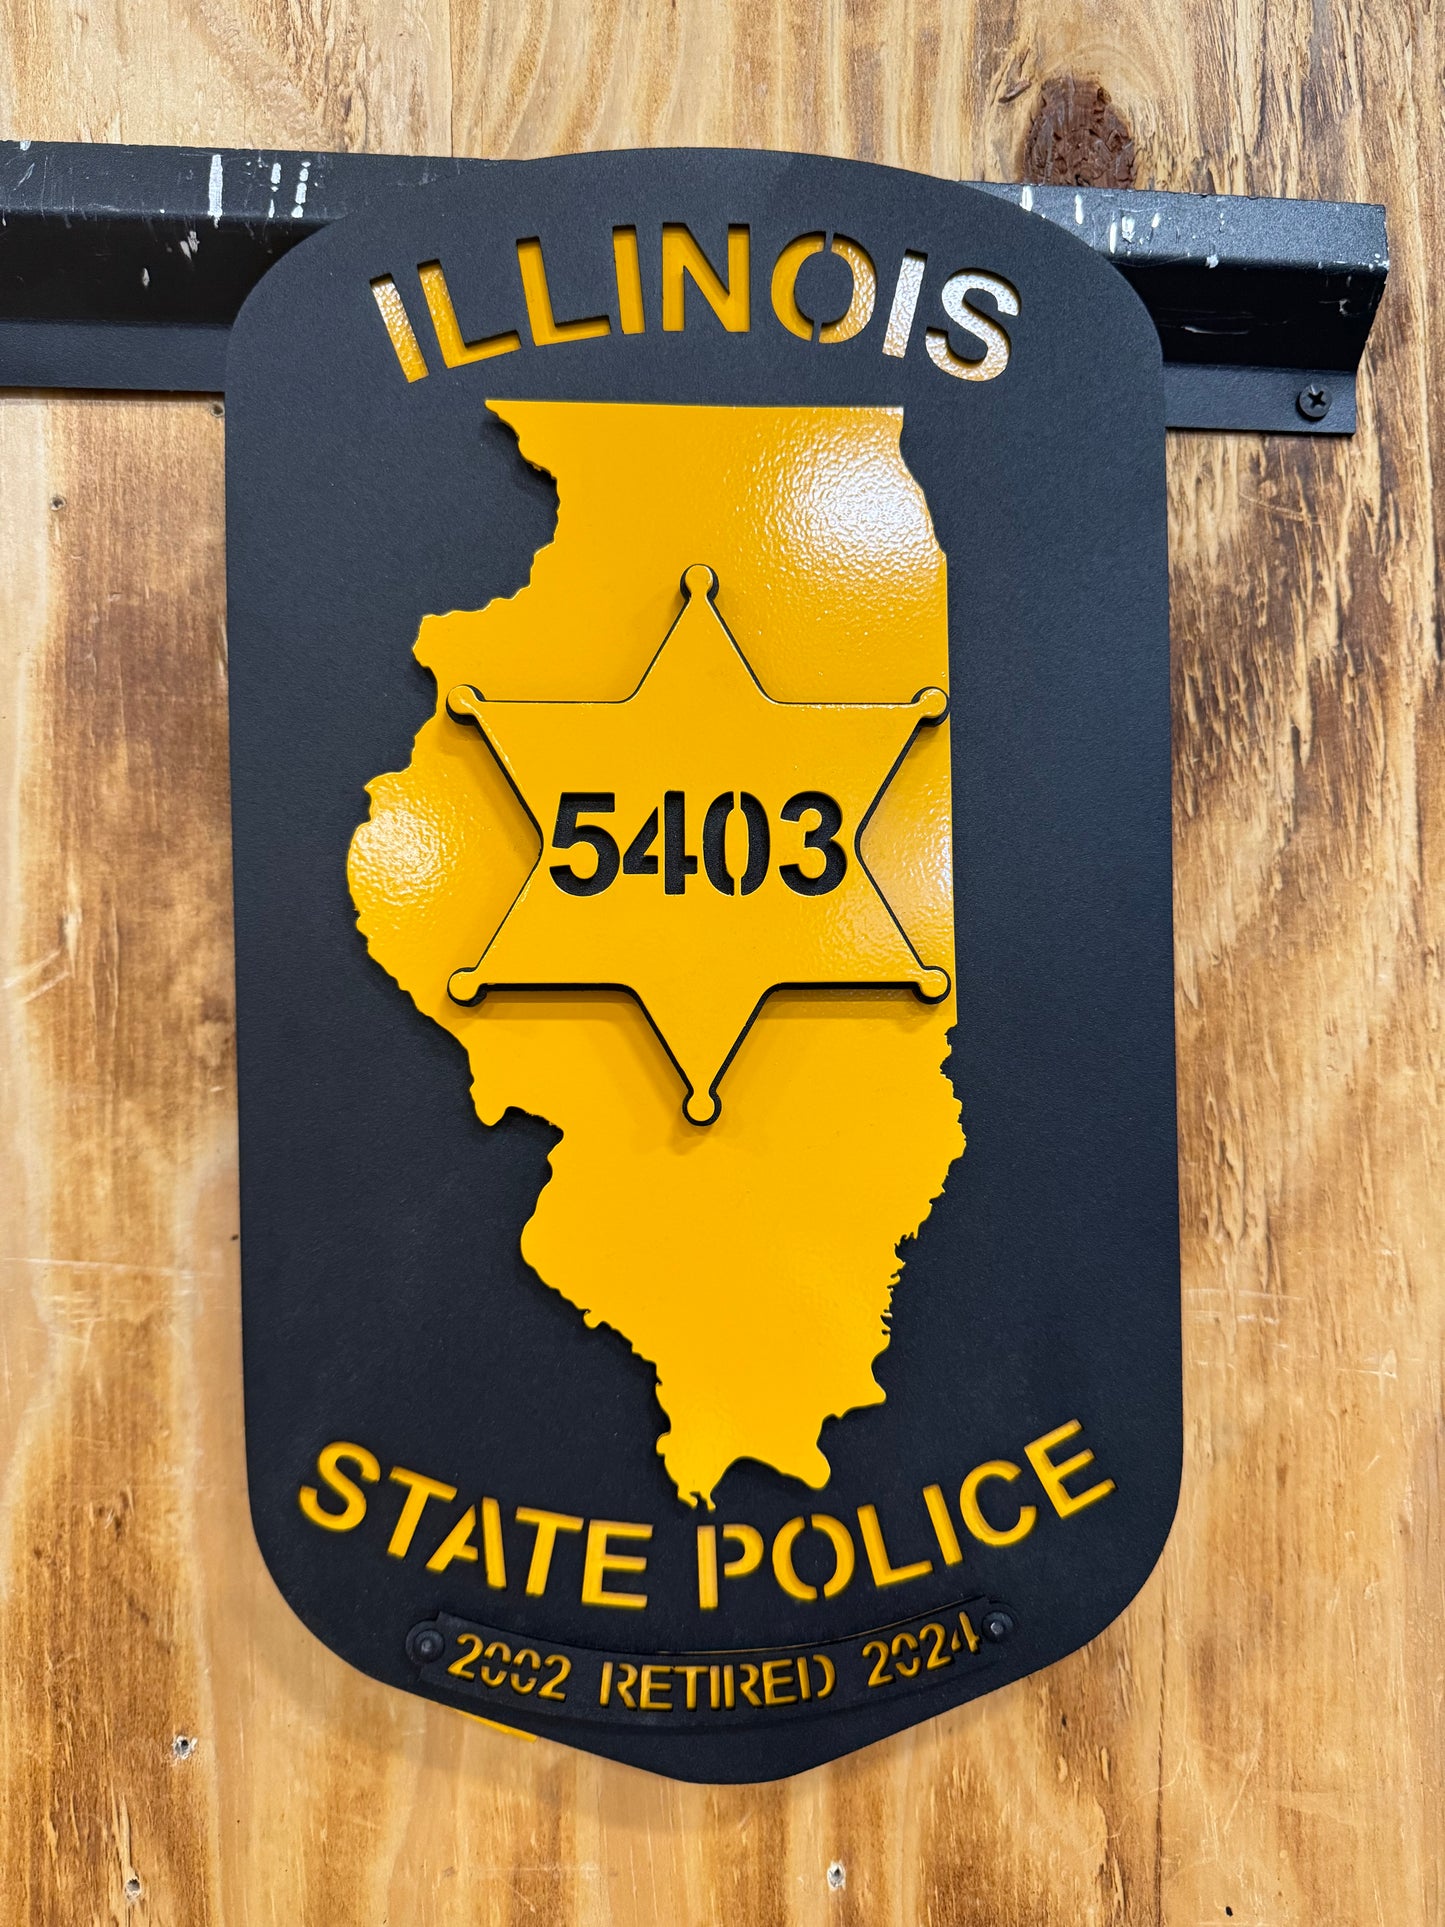 Illinois State Police Patch